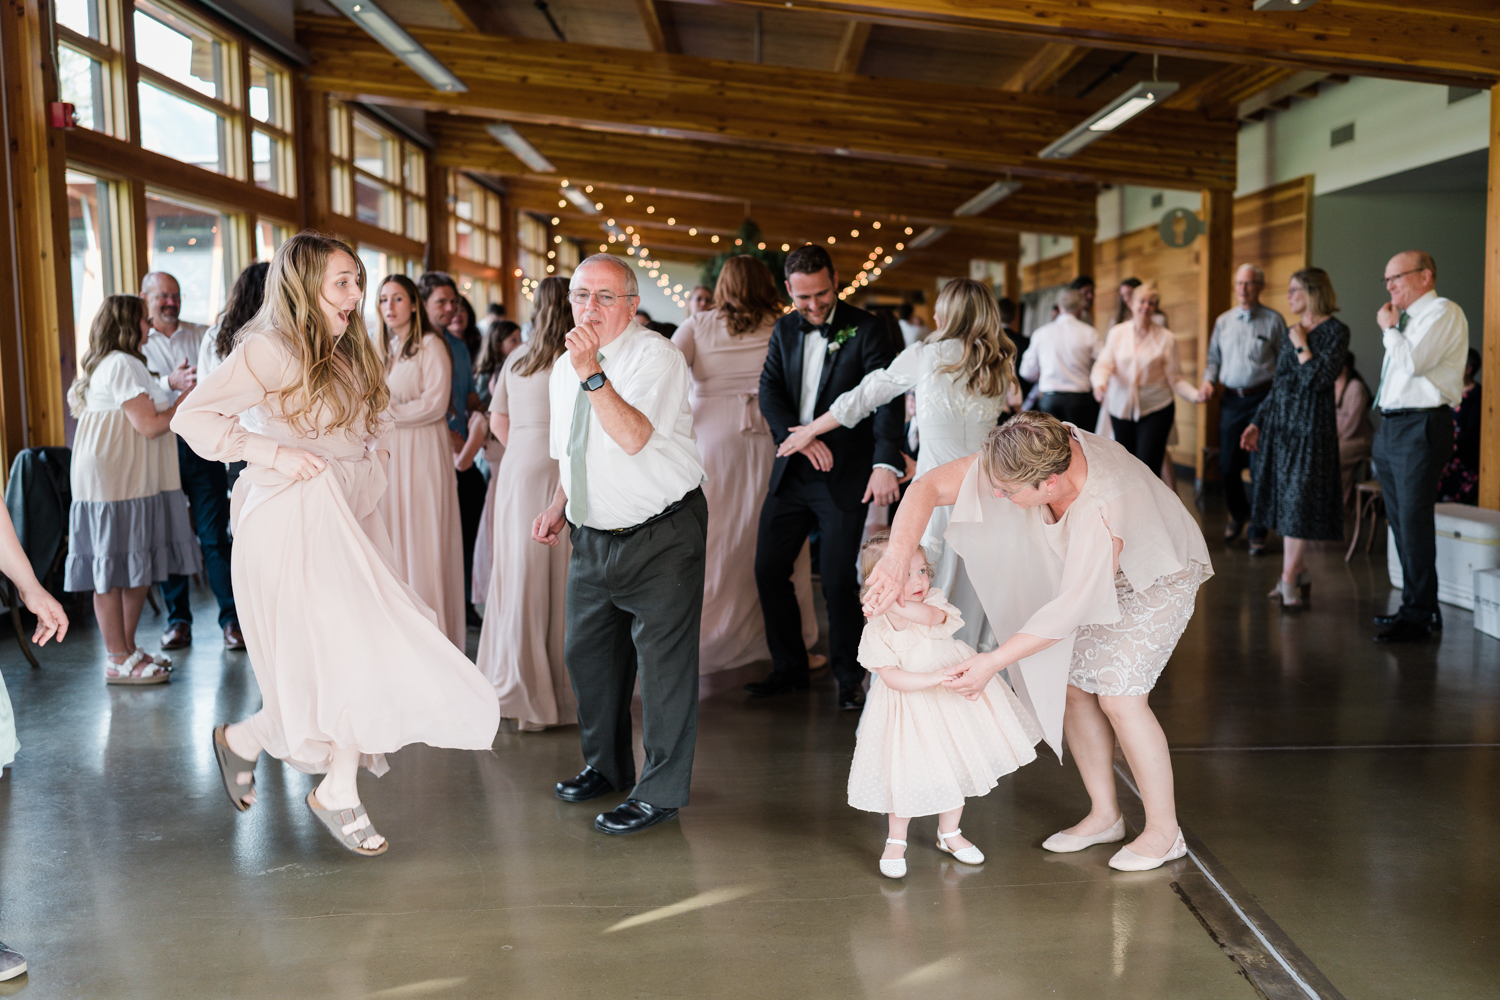 family dances together during wedding reception at Fenlands in Banff 